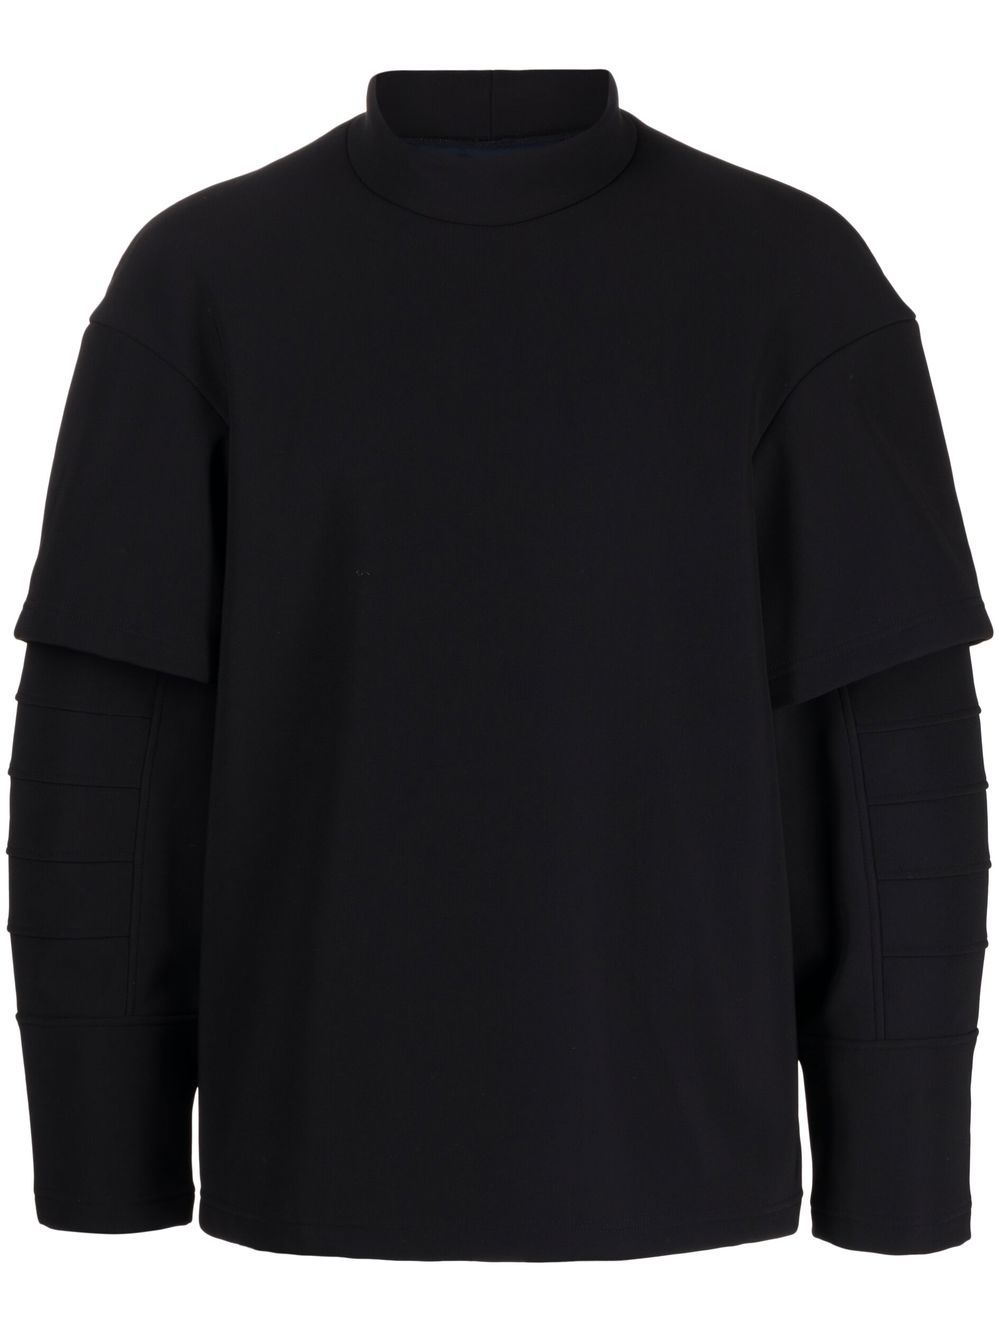 Anrealage Layered Stand-up Collar Sweatshirt In Black